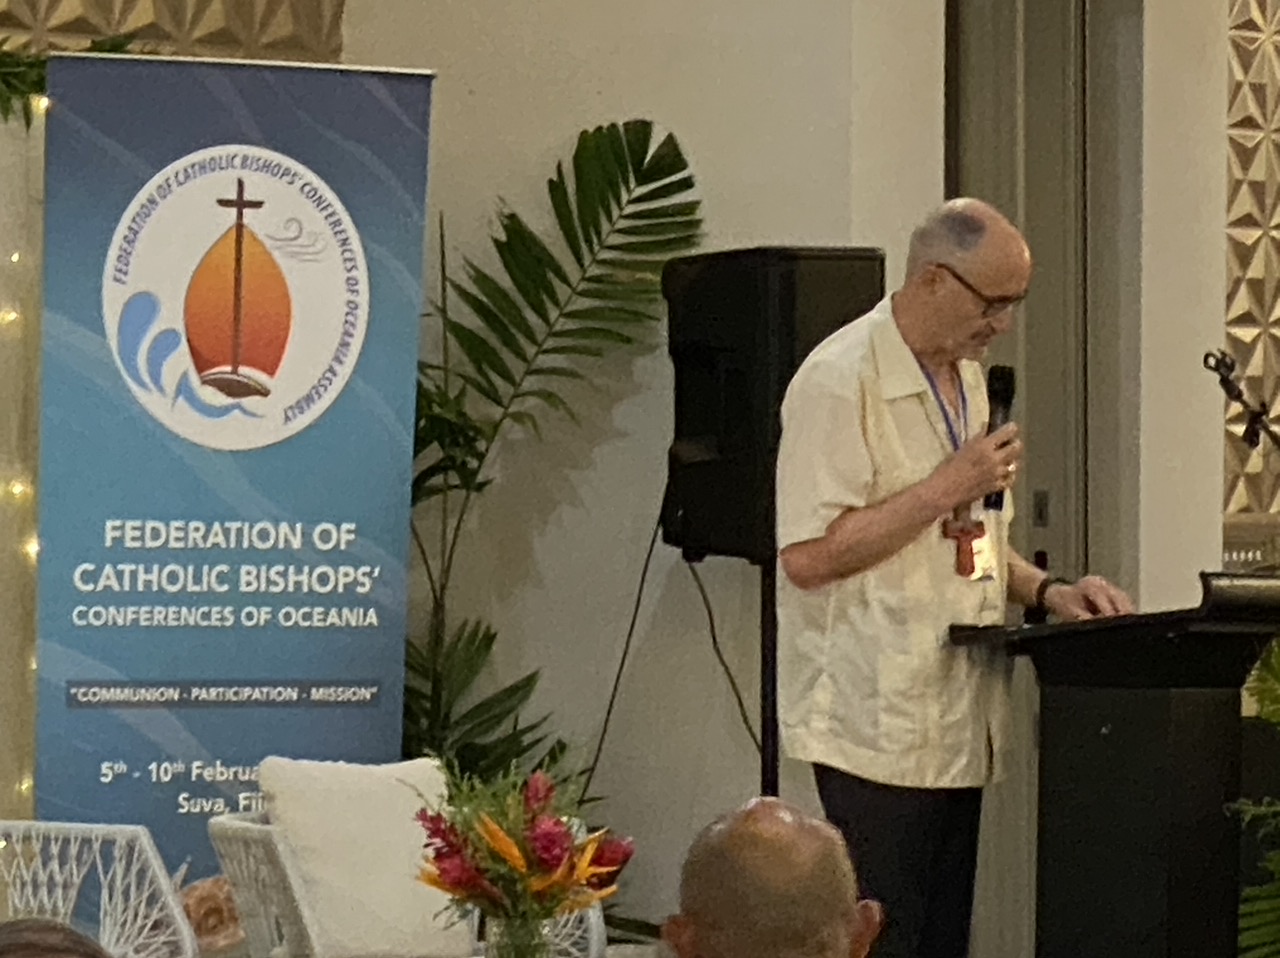 Environment, Synodality, and Dreams: Cardinal Czerny’s Addresses Bishops in Oceania